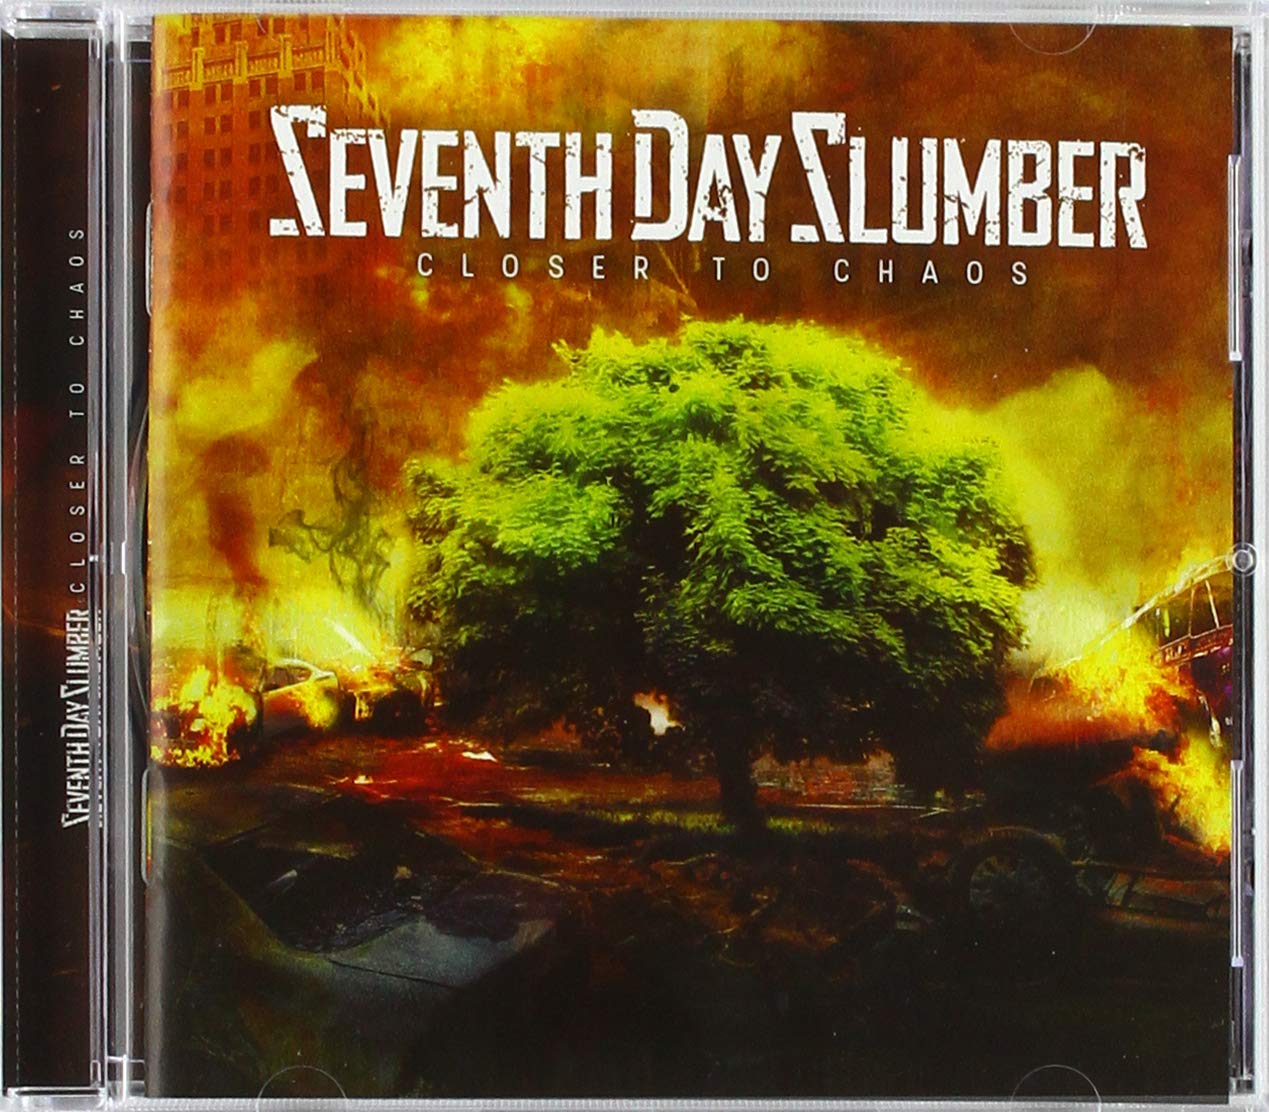 Closer to Chaos : Seventh Day Slumber